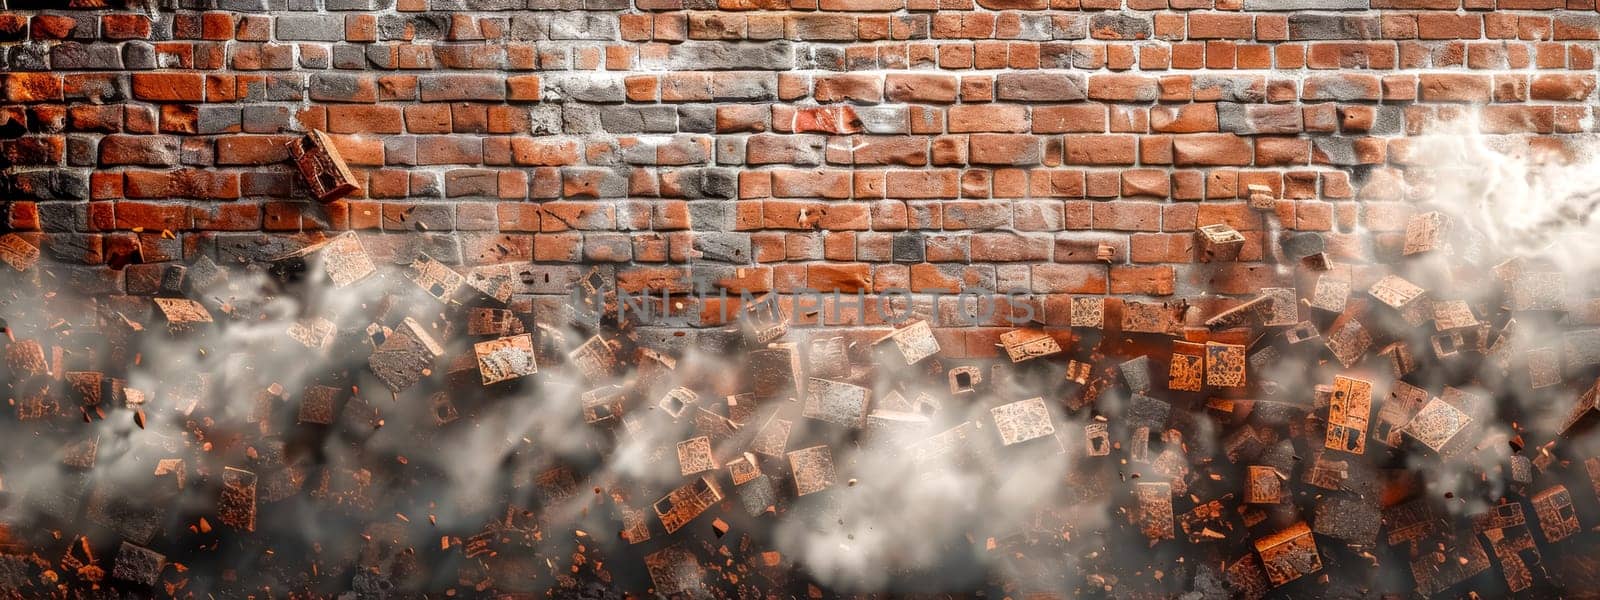 High-dynamic image of a brick wall in mid-explosion with dust and debris